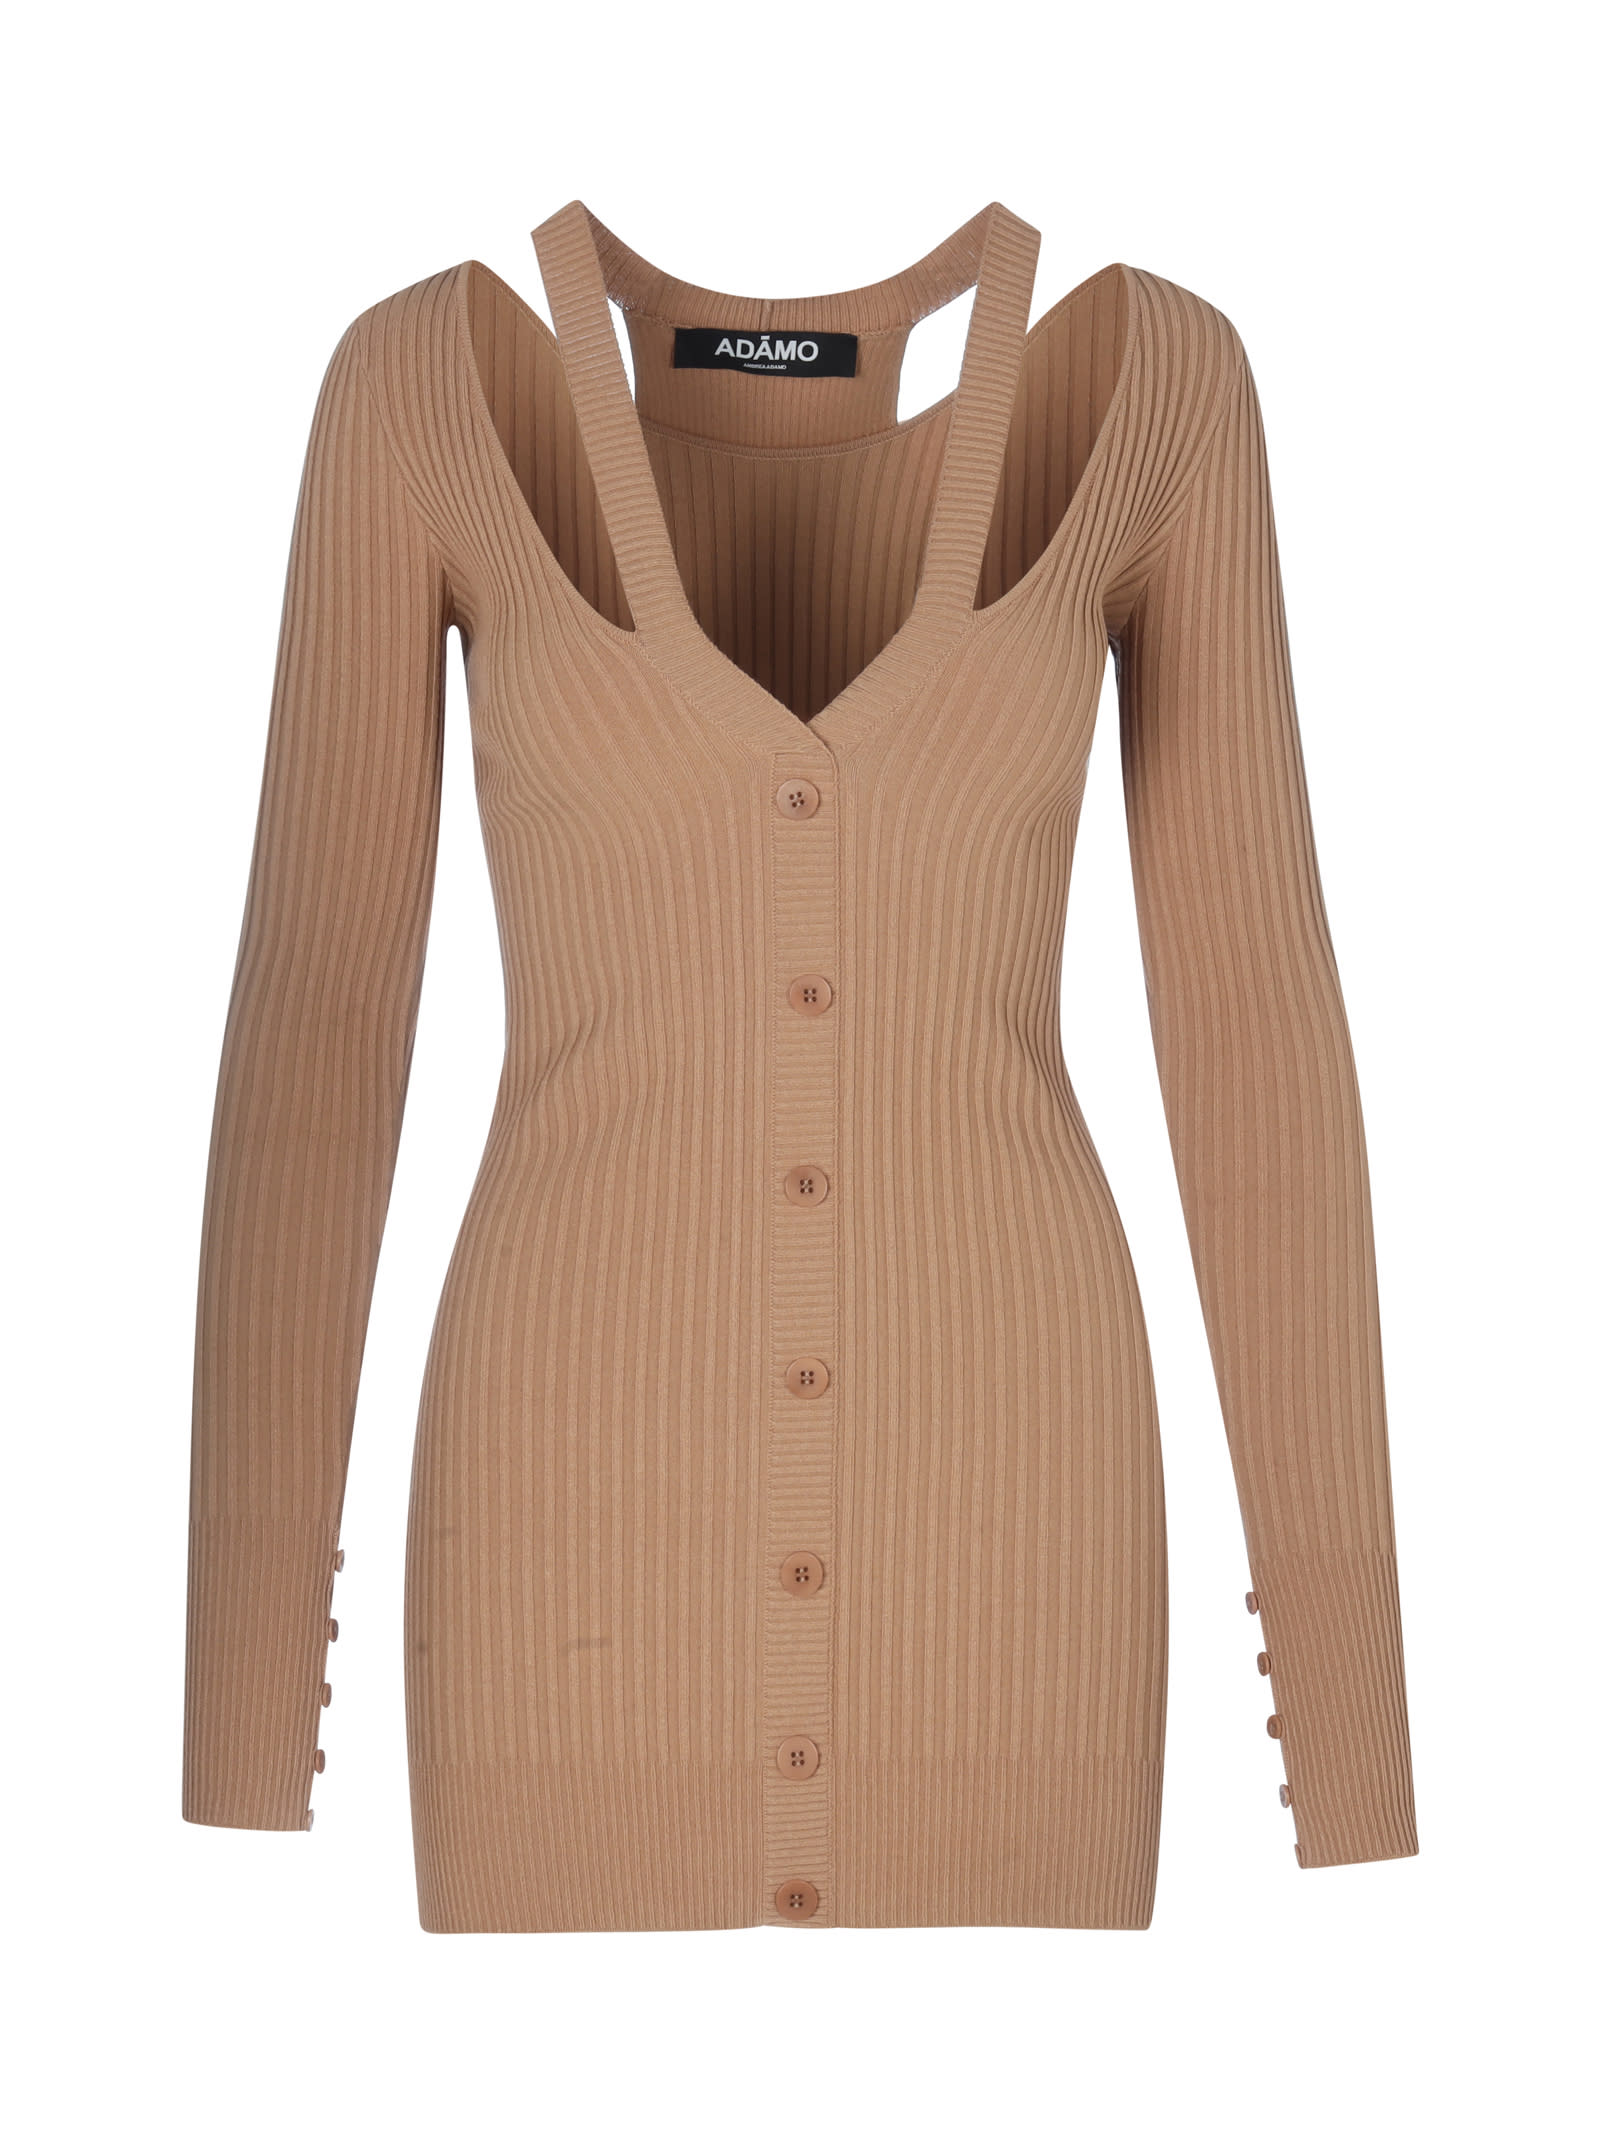 Andrea Adamo Ribbed-knit Mini Dress With Double Layer